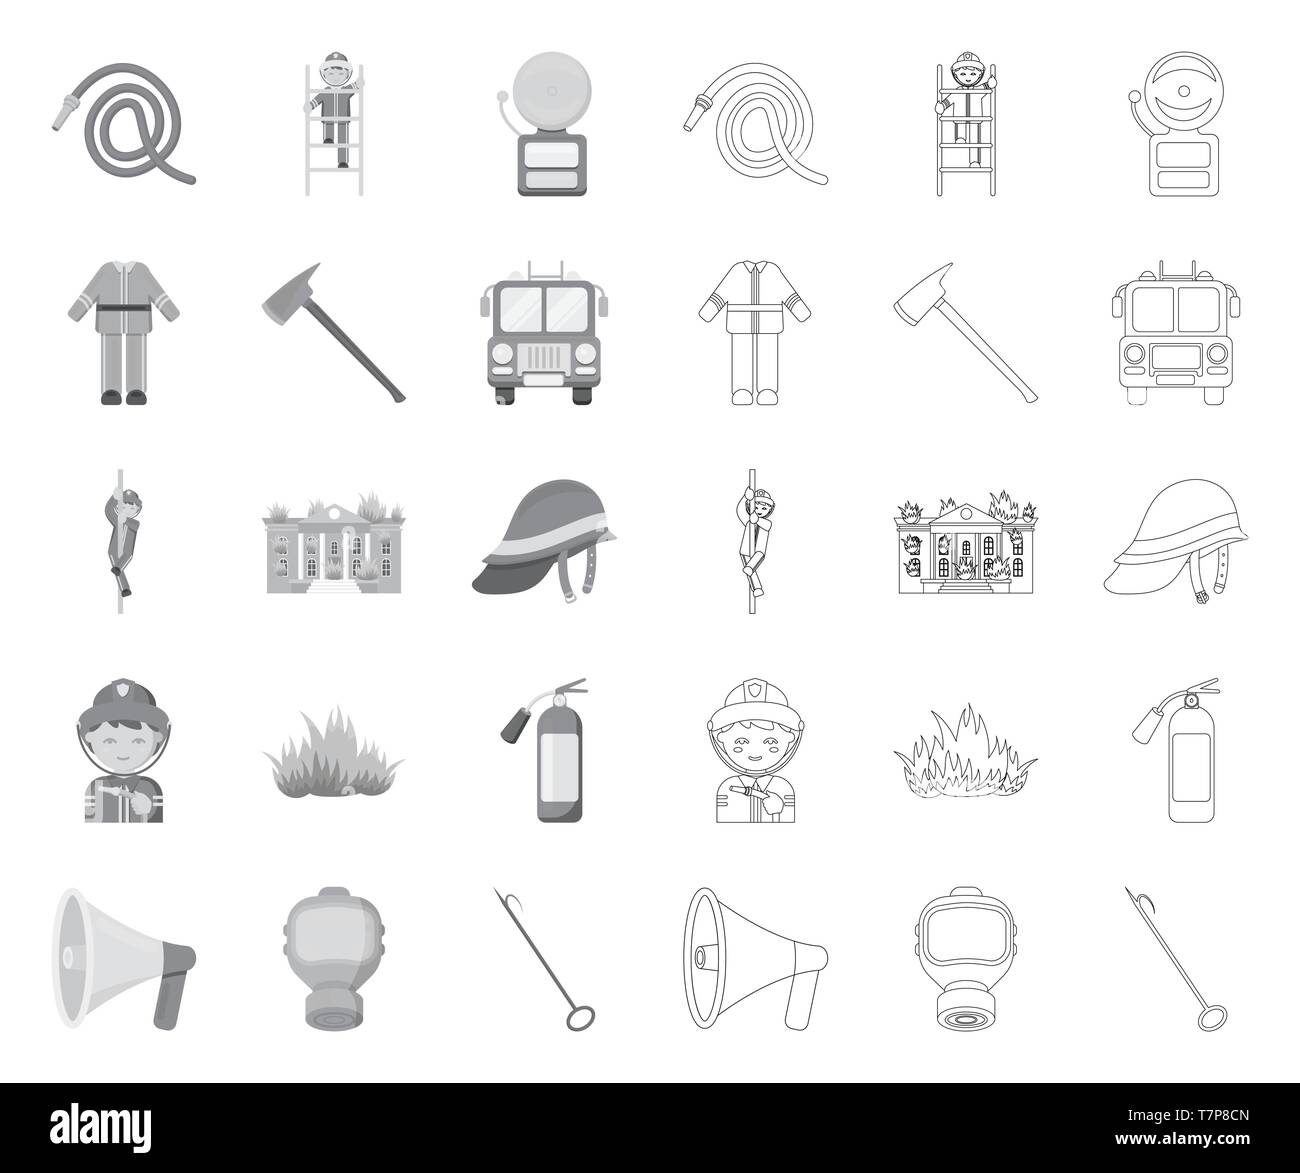 accessories,apparatus,art,attribute,axe,bucket,building,bunker,collection,conical,department,design,equipment,extinguishing,extingushier,fire,firefighter,firefighting,flame,gas,gear,helmet,icon,illustration,isolated,logo,mask,mono,outline,organization,pike,pole,pump,ring,separation,service,set,sign,slide,symbol,tools,vector,web Vector Vectors , Stock Vector